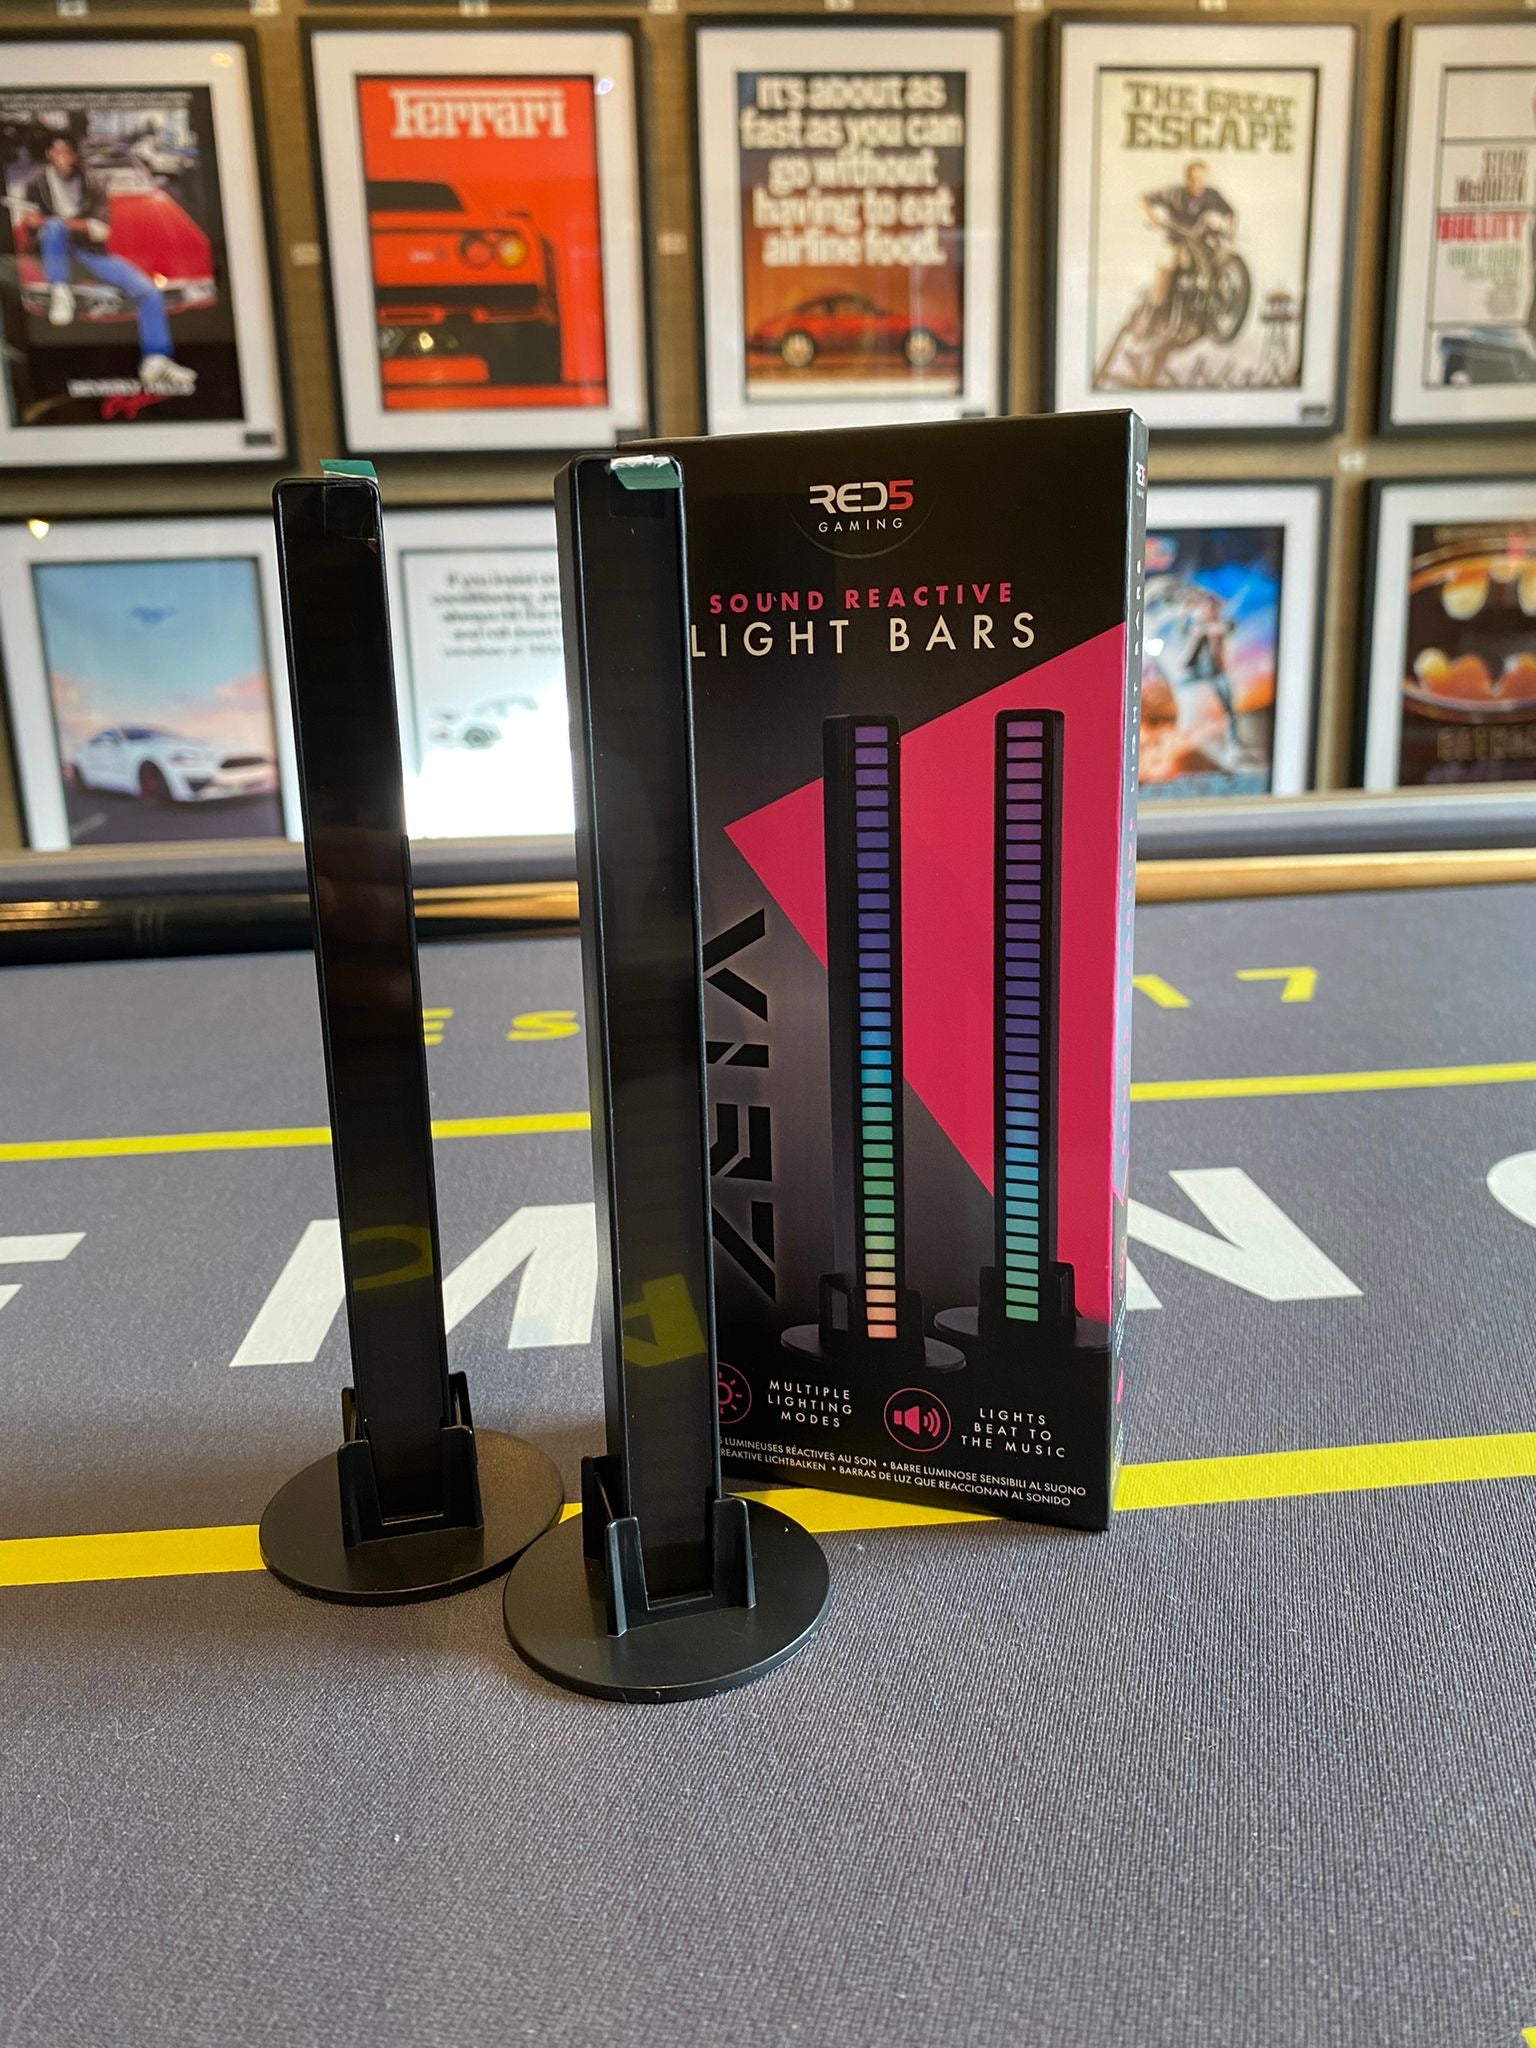 AWESOME KNIGHT RIDER LIGHT BARS!